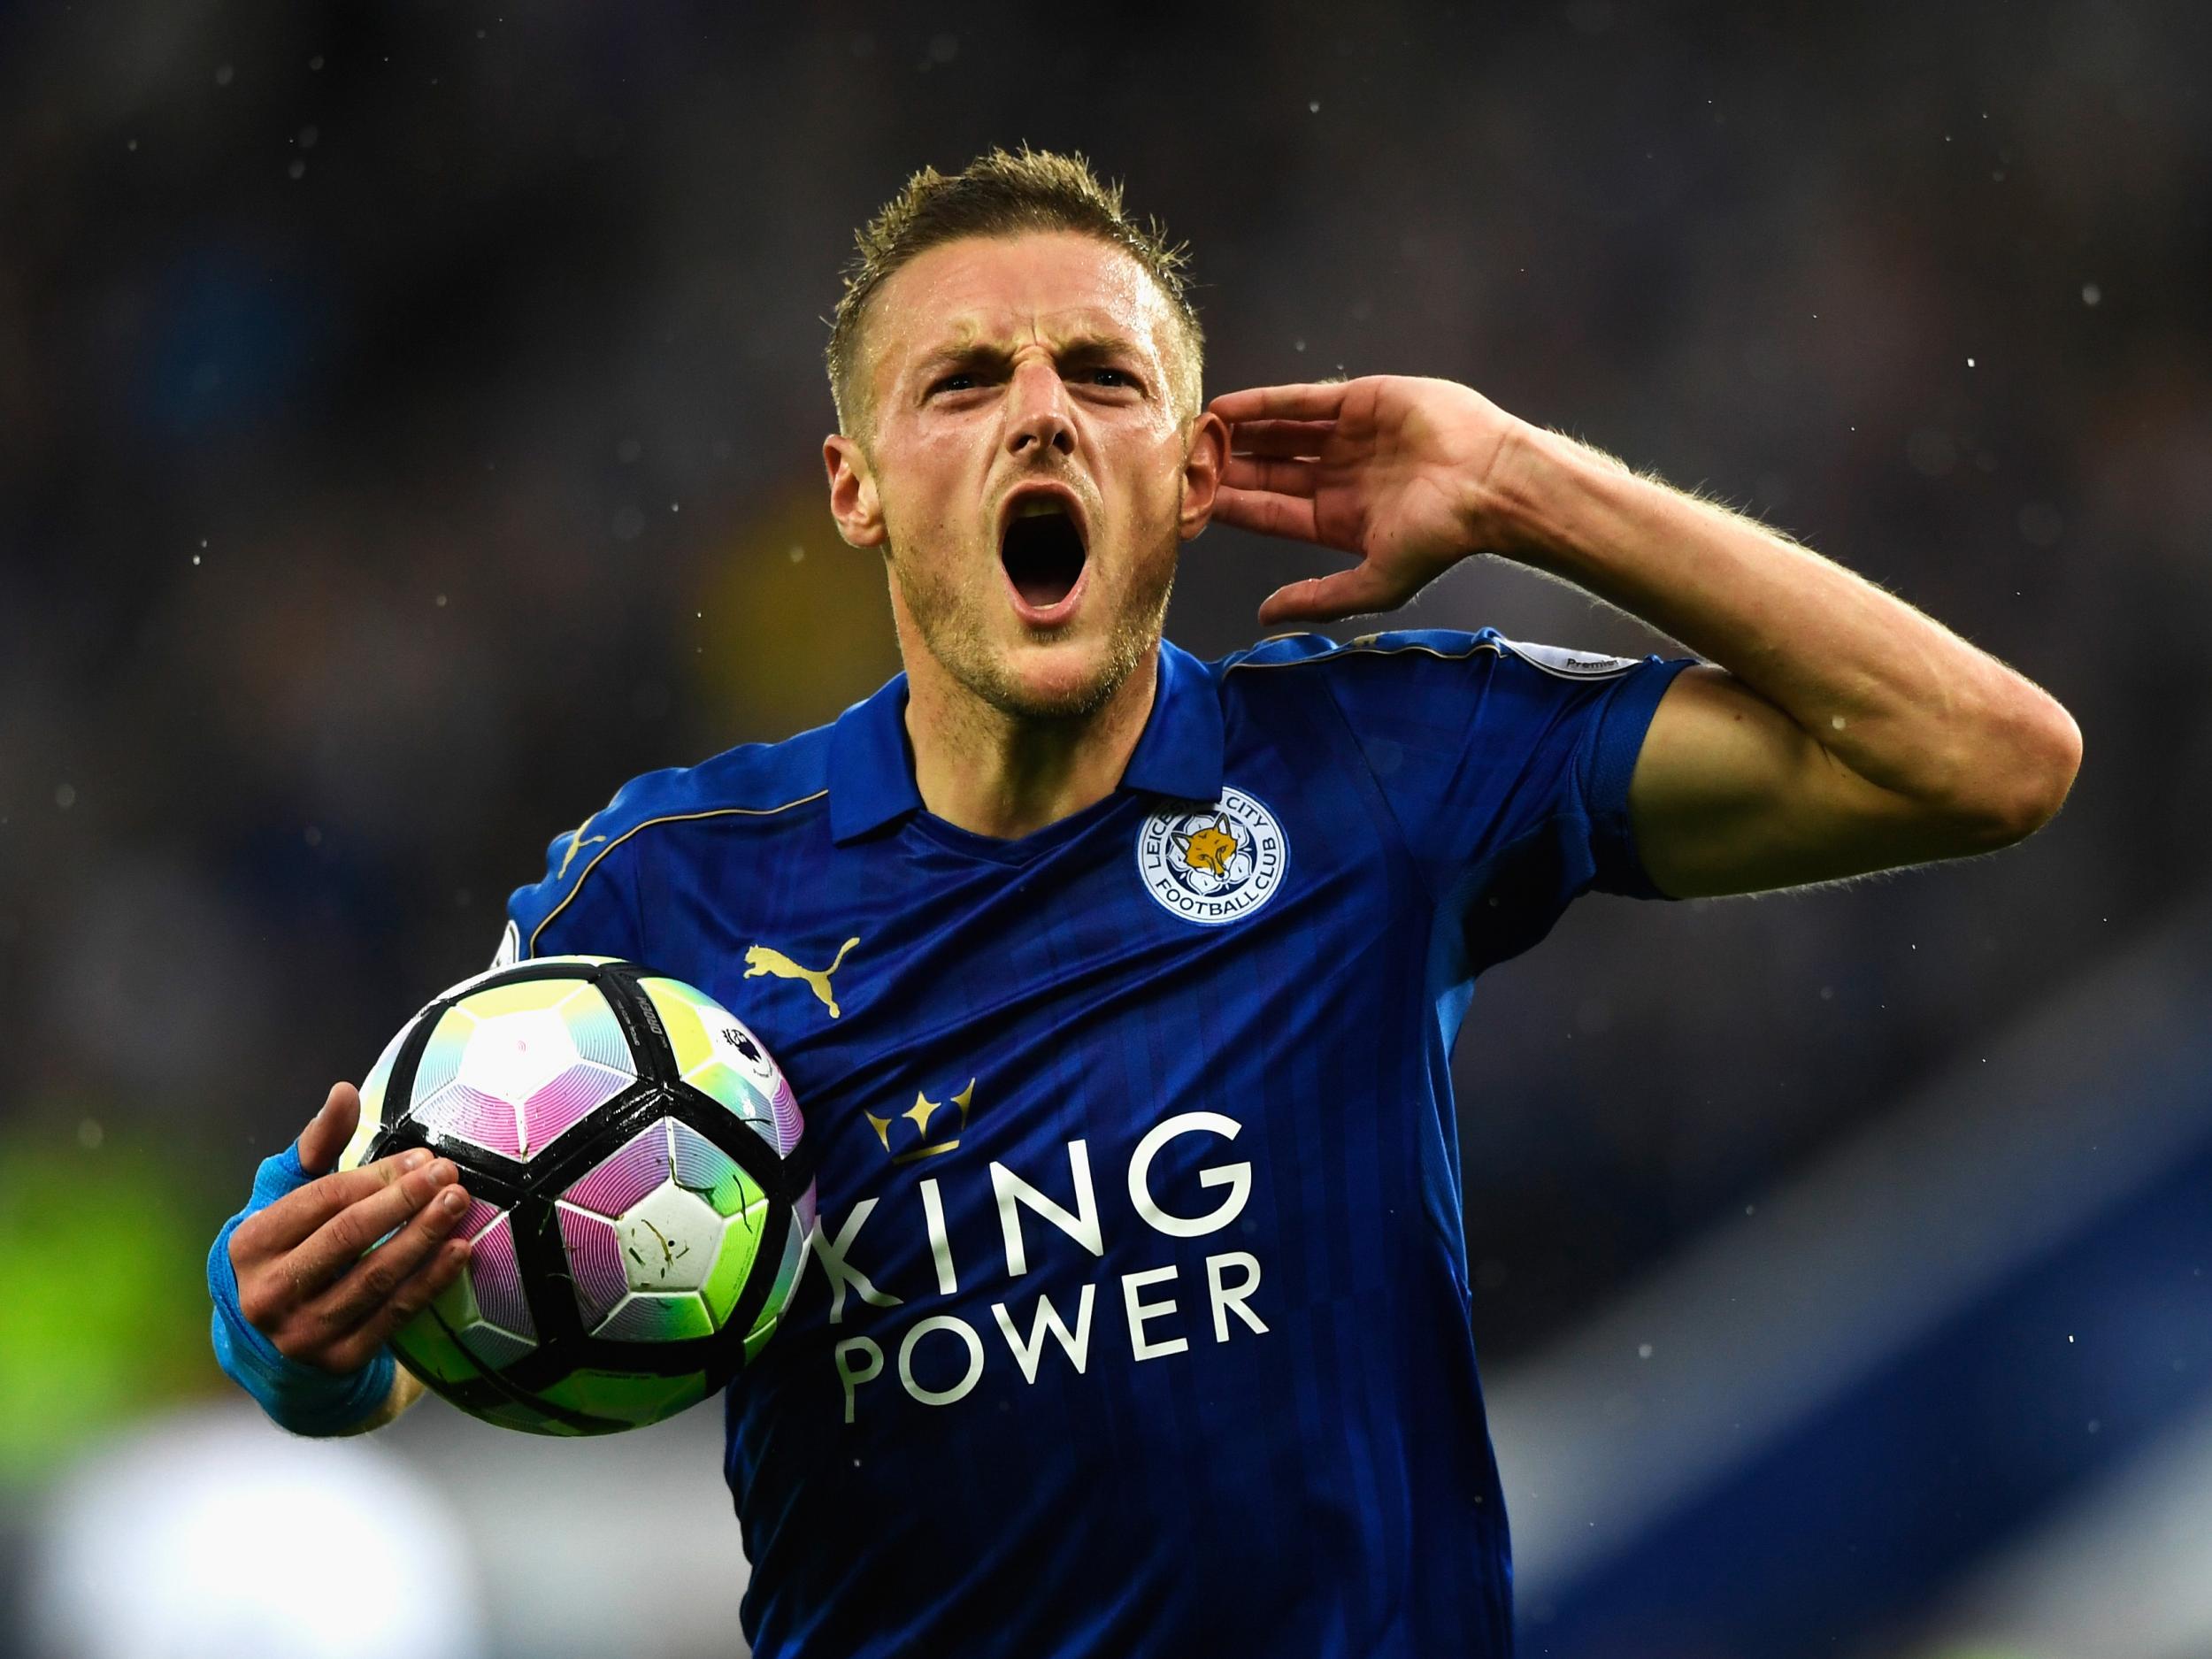 Vardy struggled in his first season as a Leicester player